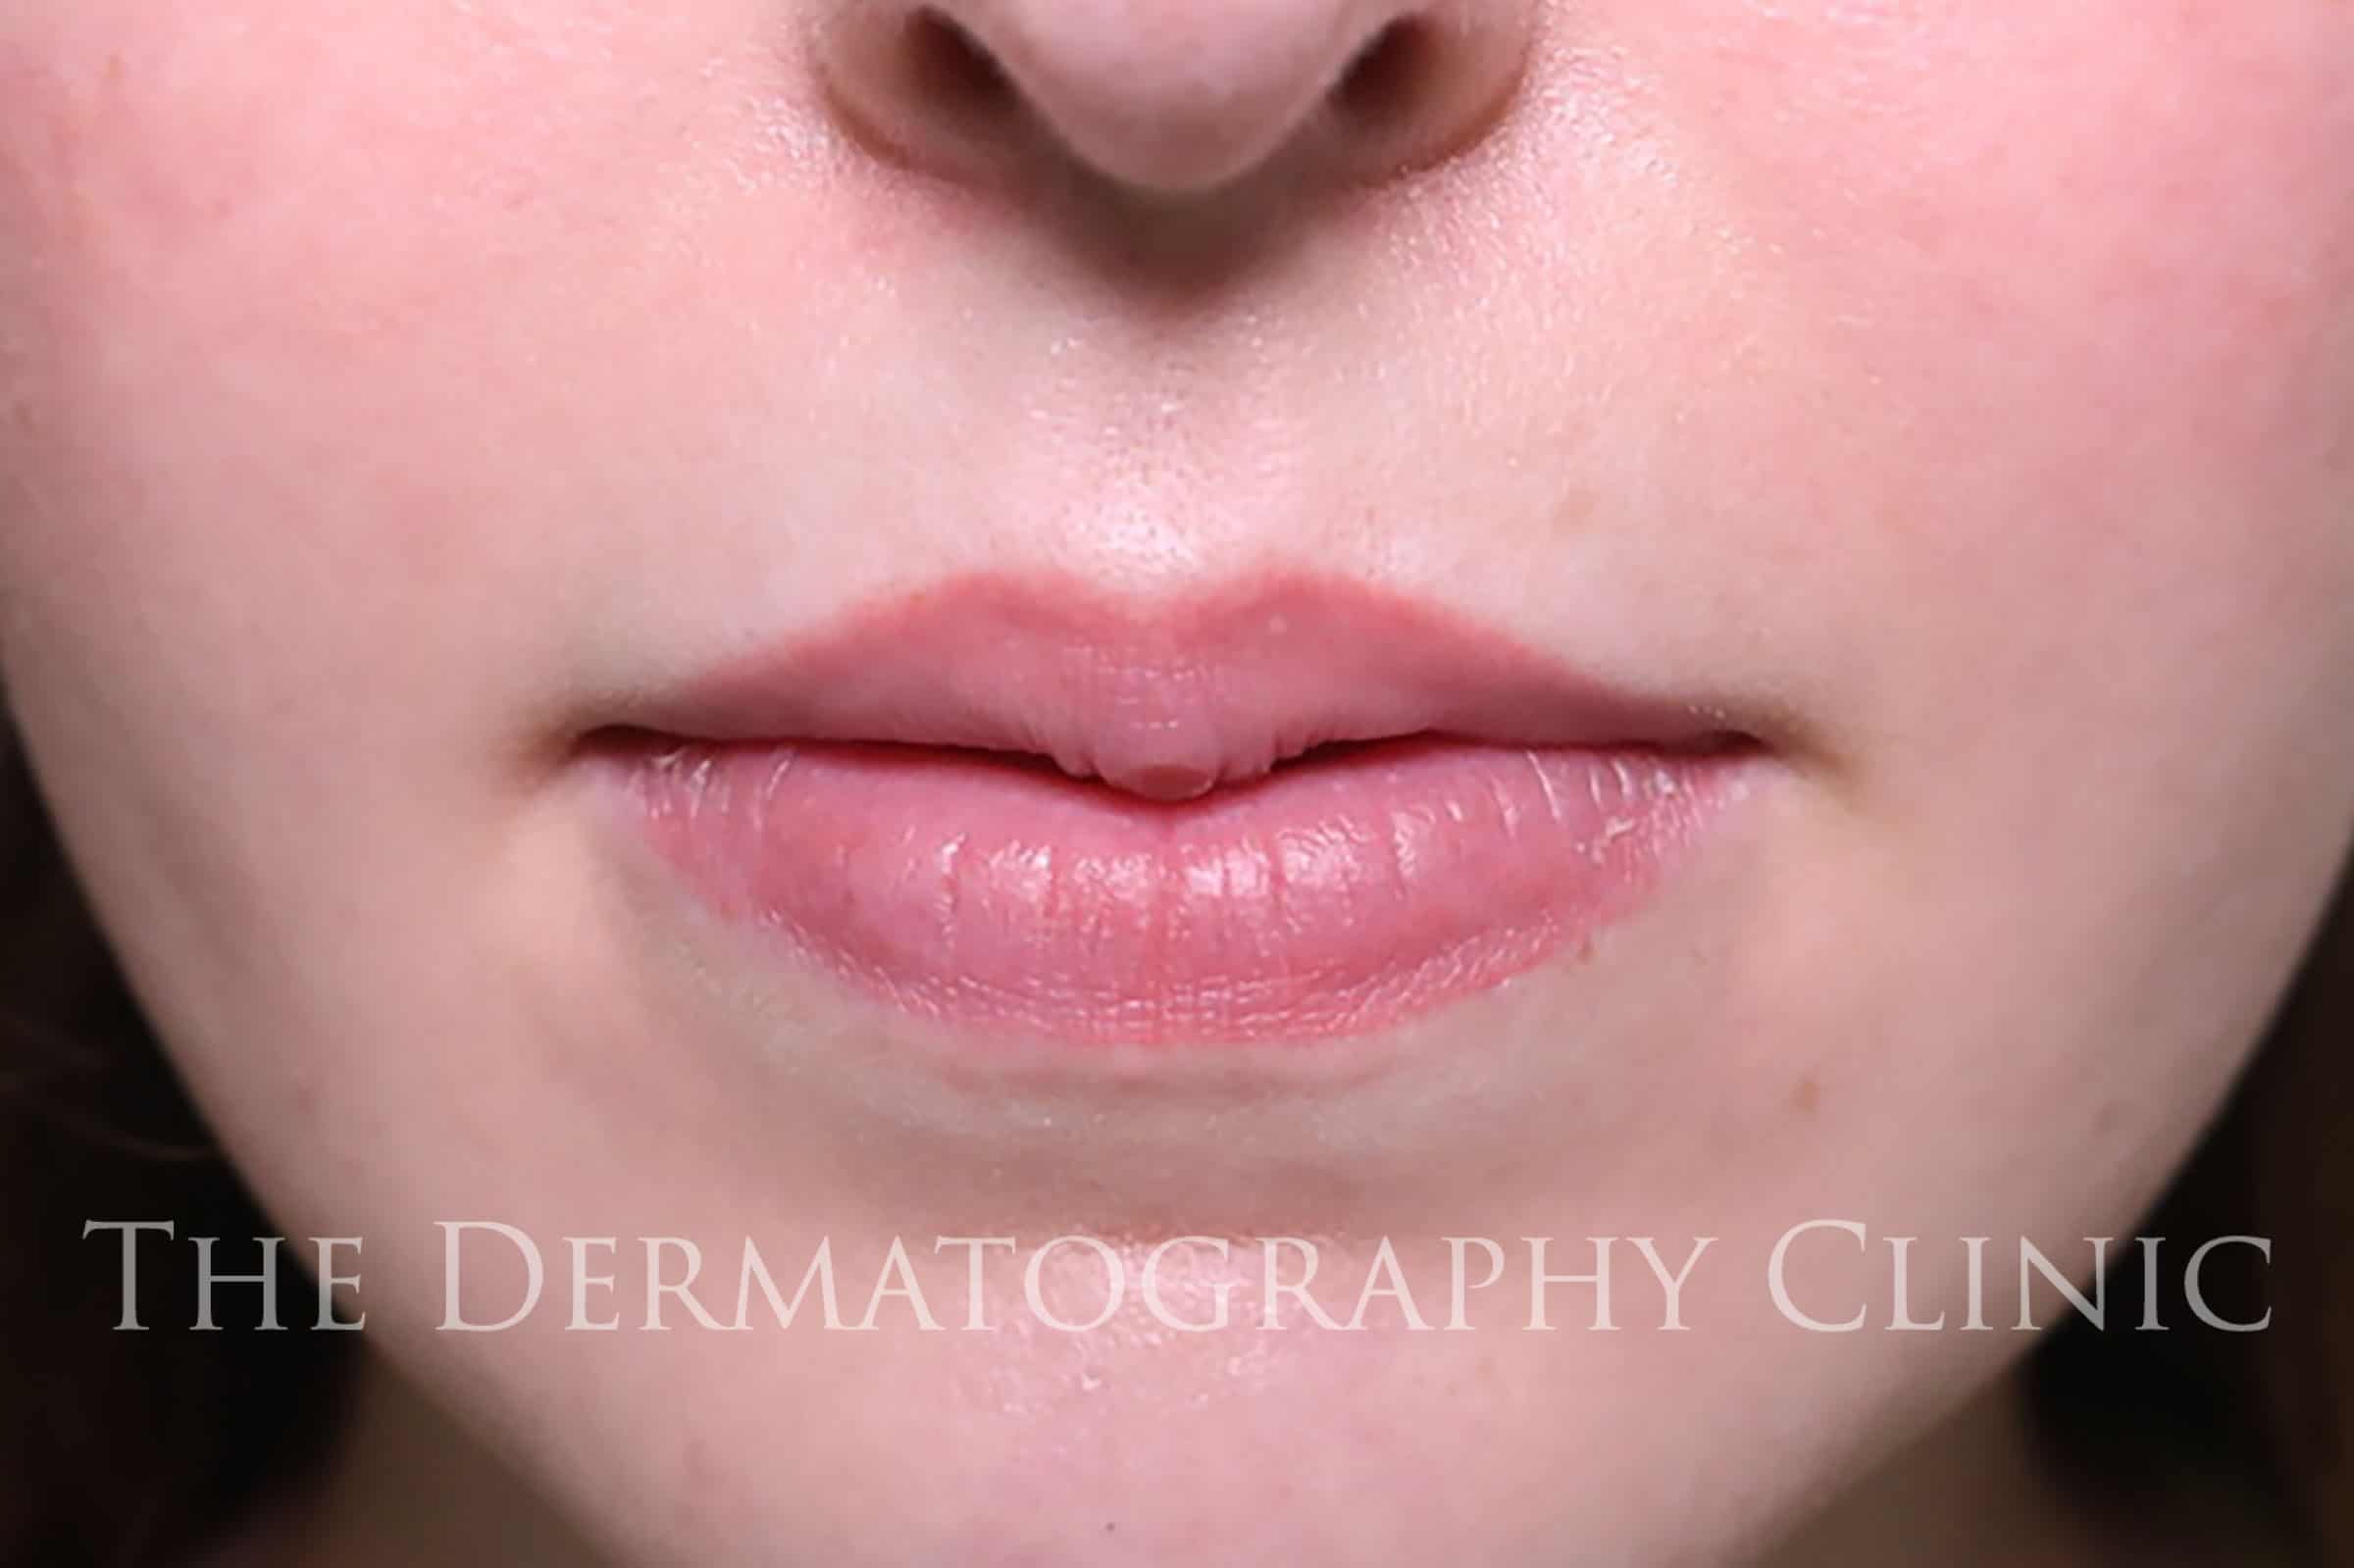 Customer Simone's after dermatography treatment photo